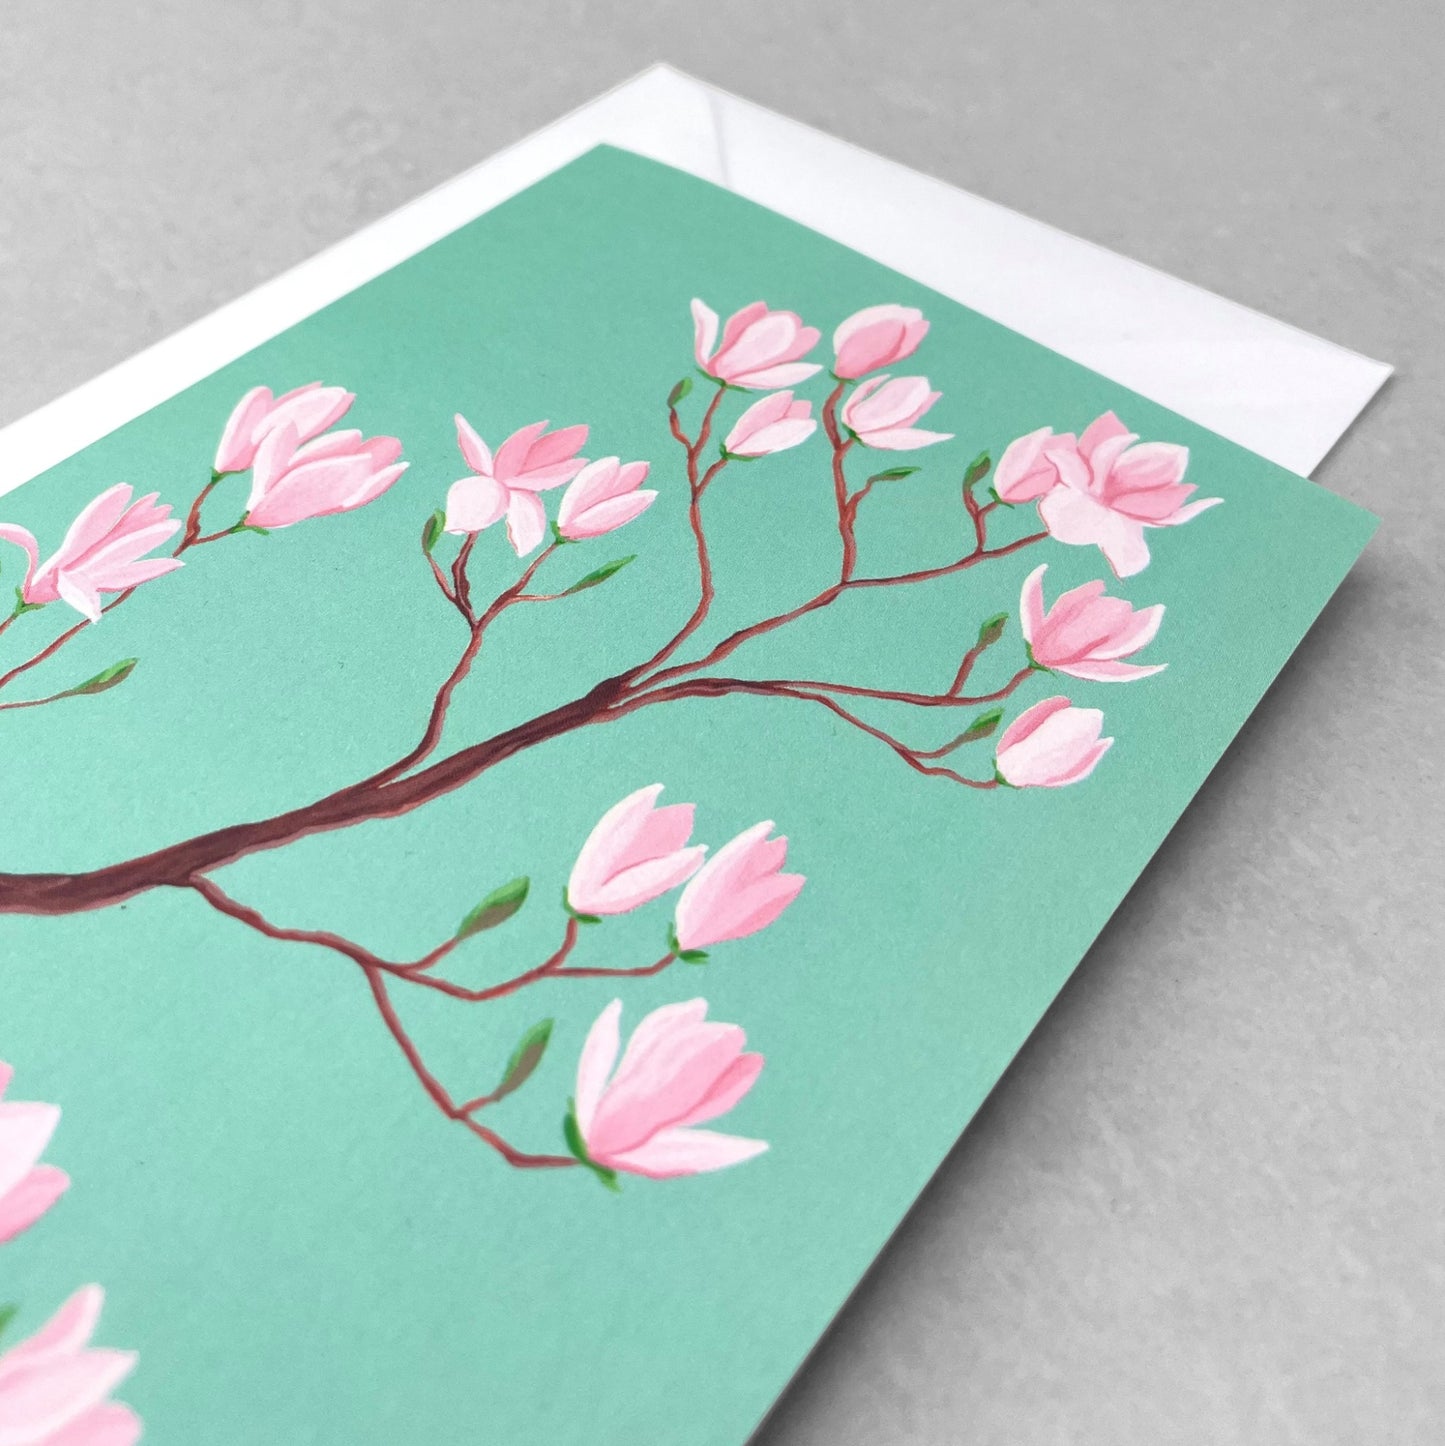 greetings card with botanical drawing of a branch of a pink blossom magnolia tree with aquamarine backdrop by Stengun Drawings